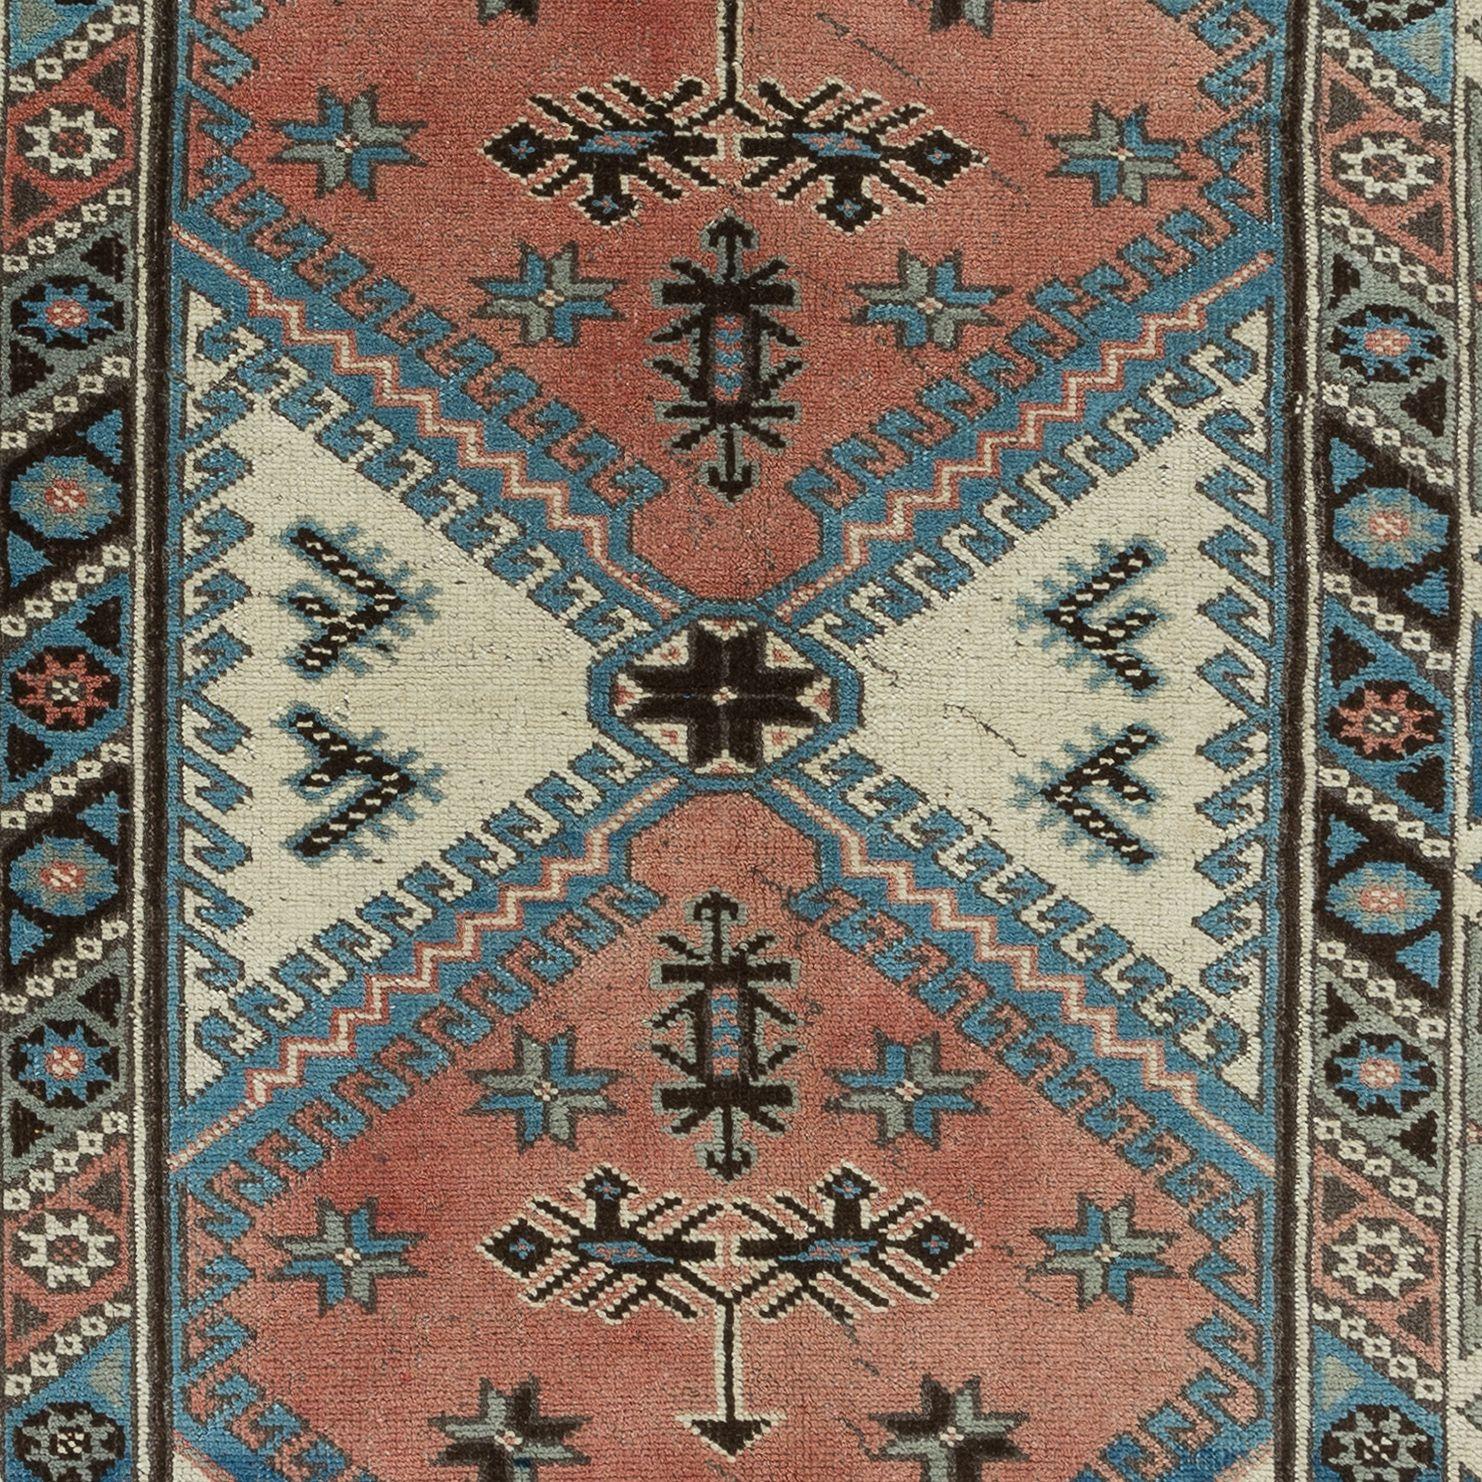 4x6 Ft Unique Vintage Handmade Turkish Area Rug with Geometric Patters, All Wool In Good Condition For Sale In Philadelphia, PA